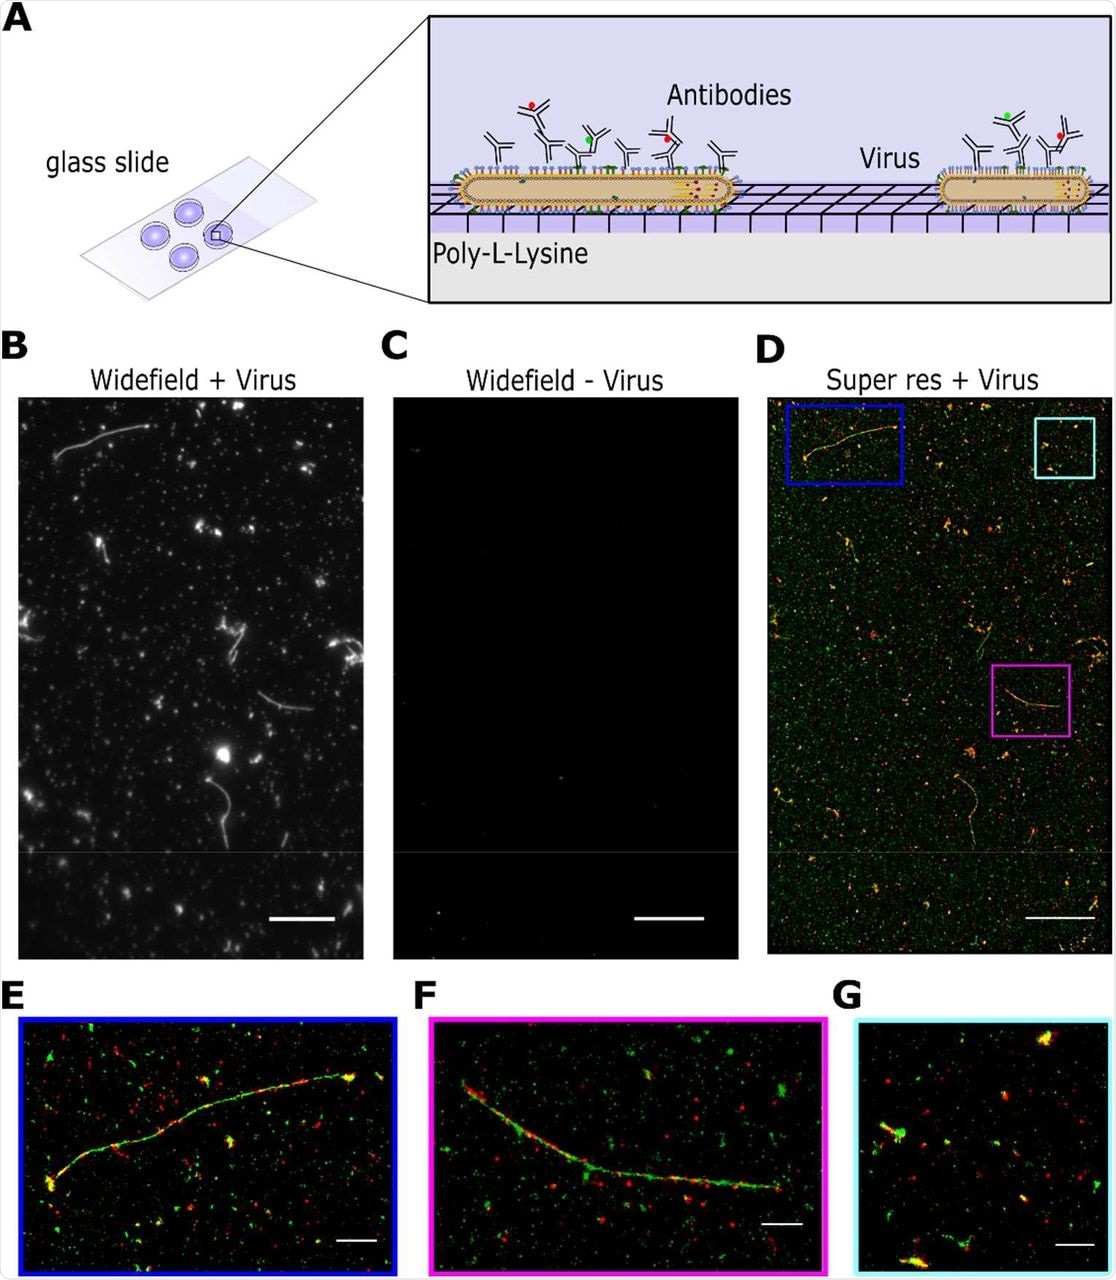 High throughput imaging of influenza using super-resolution microscopy A) Schematic of the labelling protocol. Virus samples were dried directly onto glass coverslips pre-coated with poly-L-lysine before being fixed, permeabilised and stained with antibodies using a standard immunofluorescence protocol. B) A representative field of view (FOV) of a widefield image of labelled A/Udorn/72 influenza, imaged in the green channel. Scale bar 10 μm. C) A representative FOV of a widefield image of a virus negative sample, imaged in the green channel. Scale bar 10 μm. D) The corresponding dSTORM image of the FOV in B), where HA is labelled in green and NA is labelled in red. Scale bar 10 μm. E-G) Zoomed in images from D) showing individual filaments and spherical particles. Scale bar 5 μm.